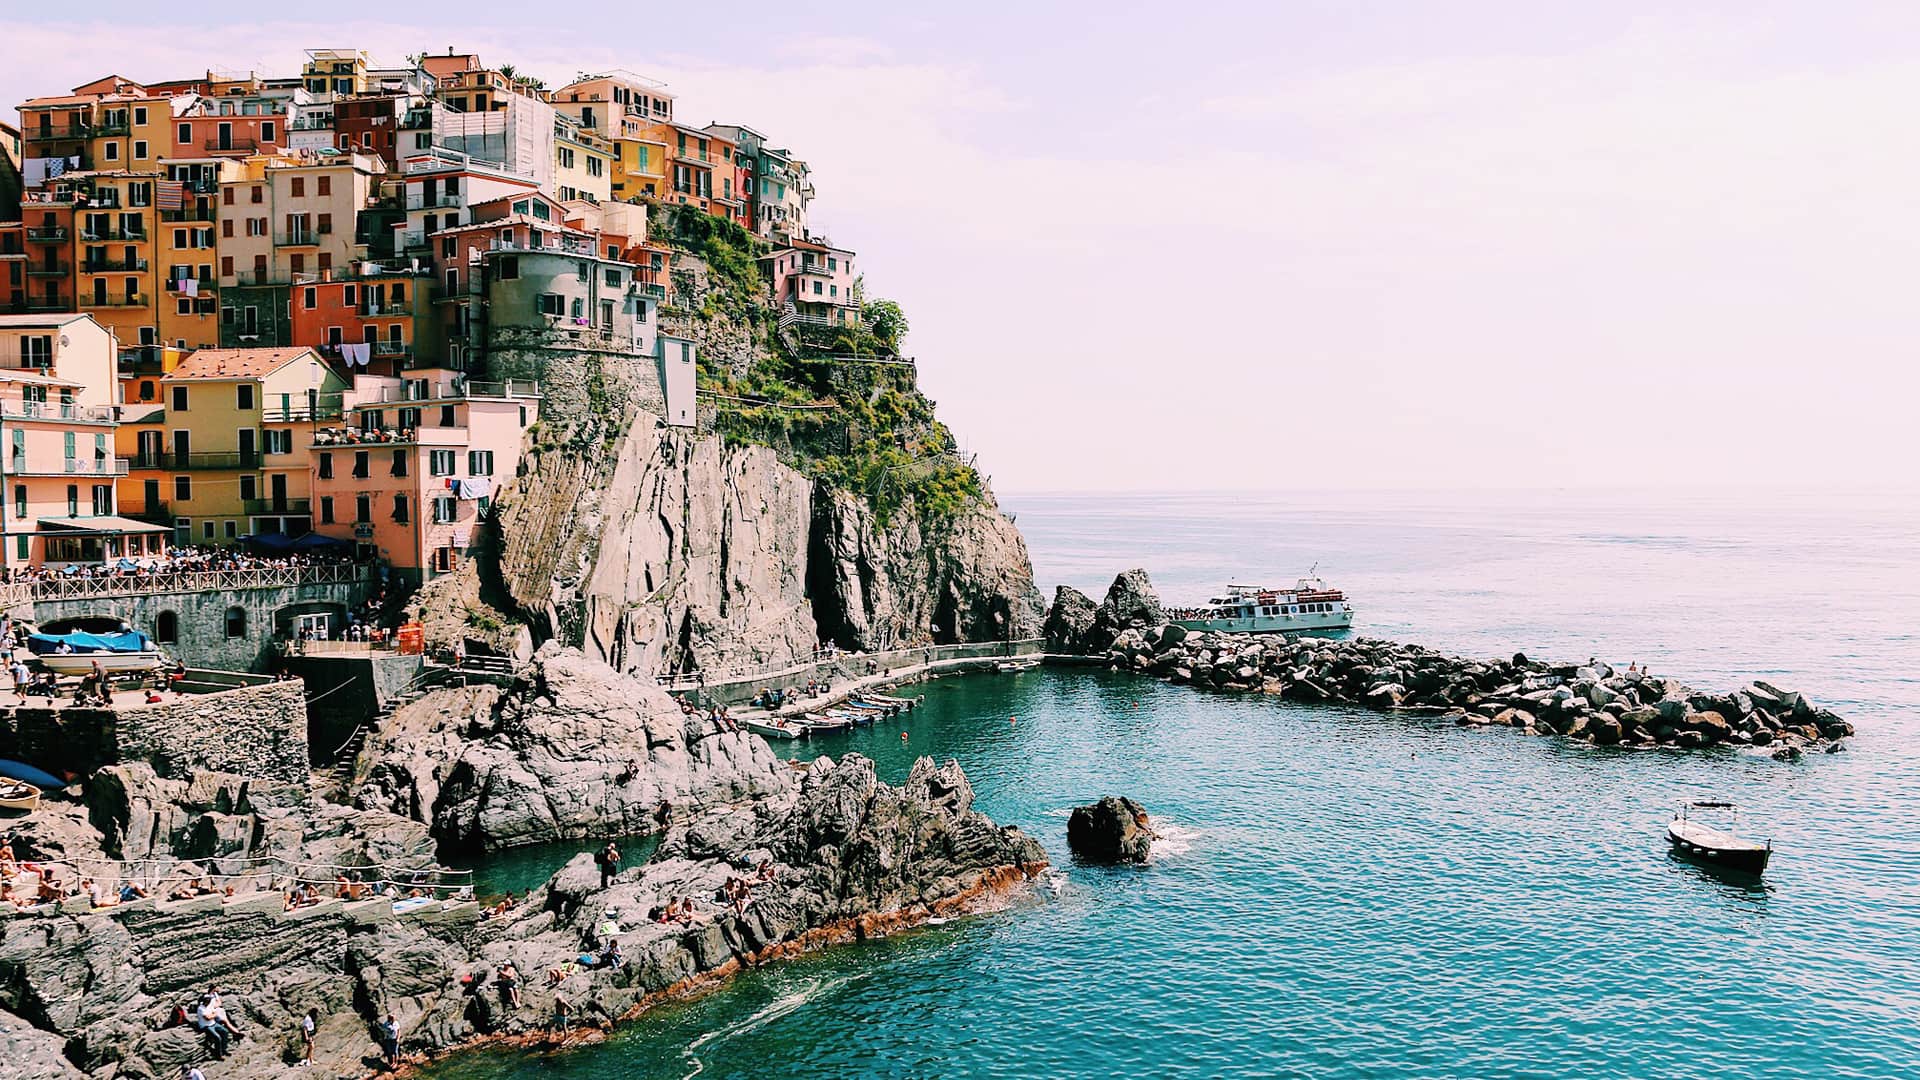 Houses clustered on a steep rocky hill, Cinqueterre, Italy.